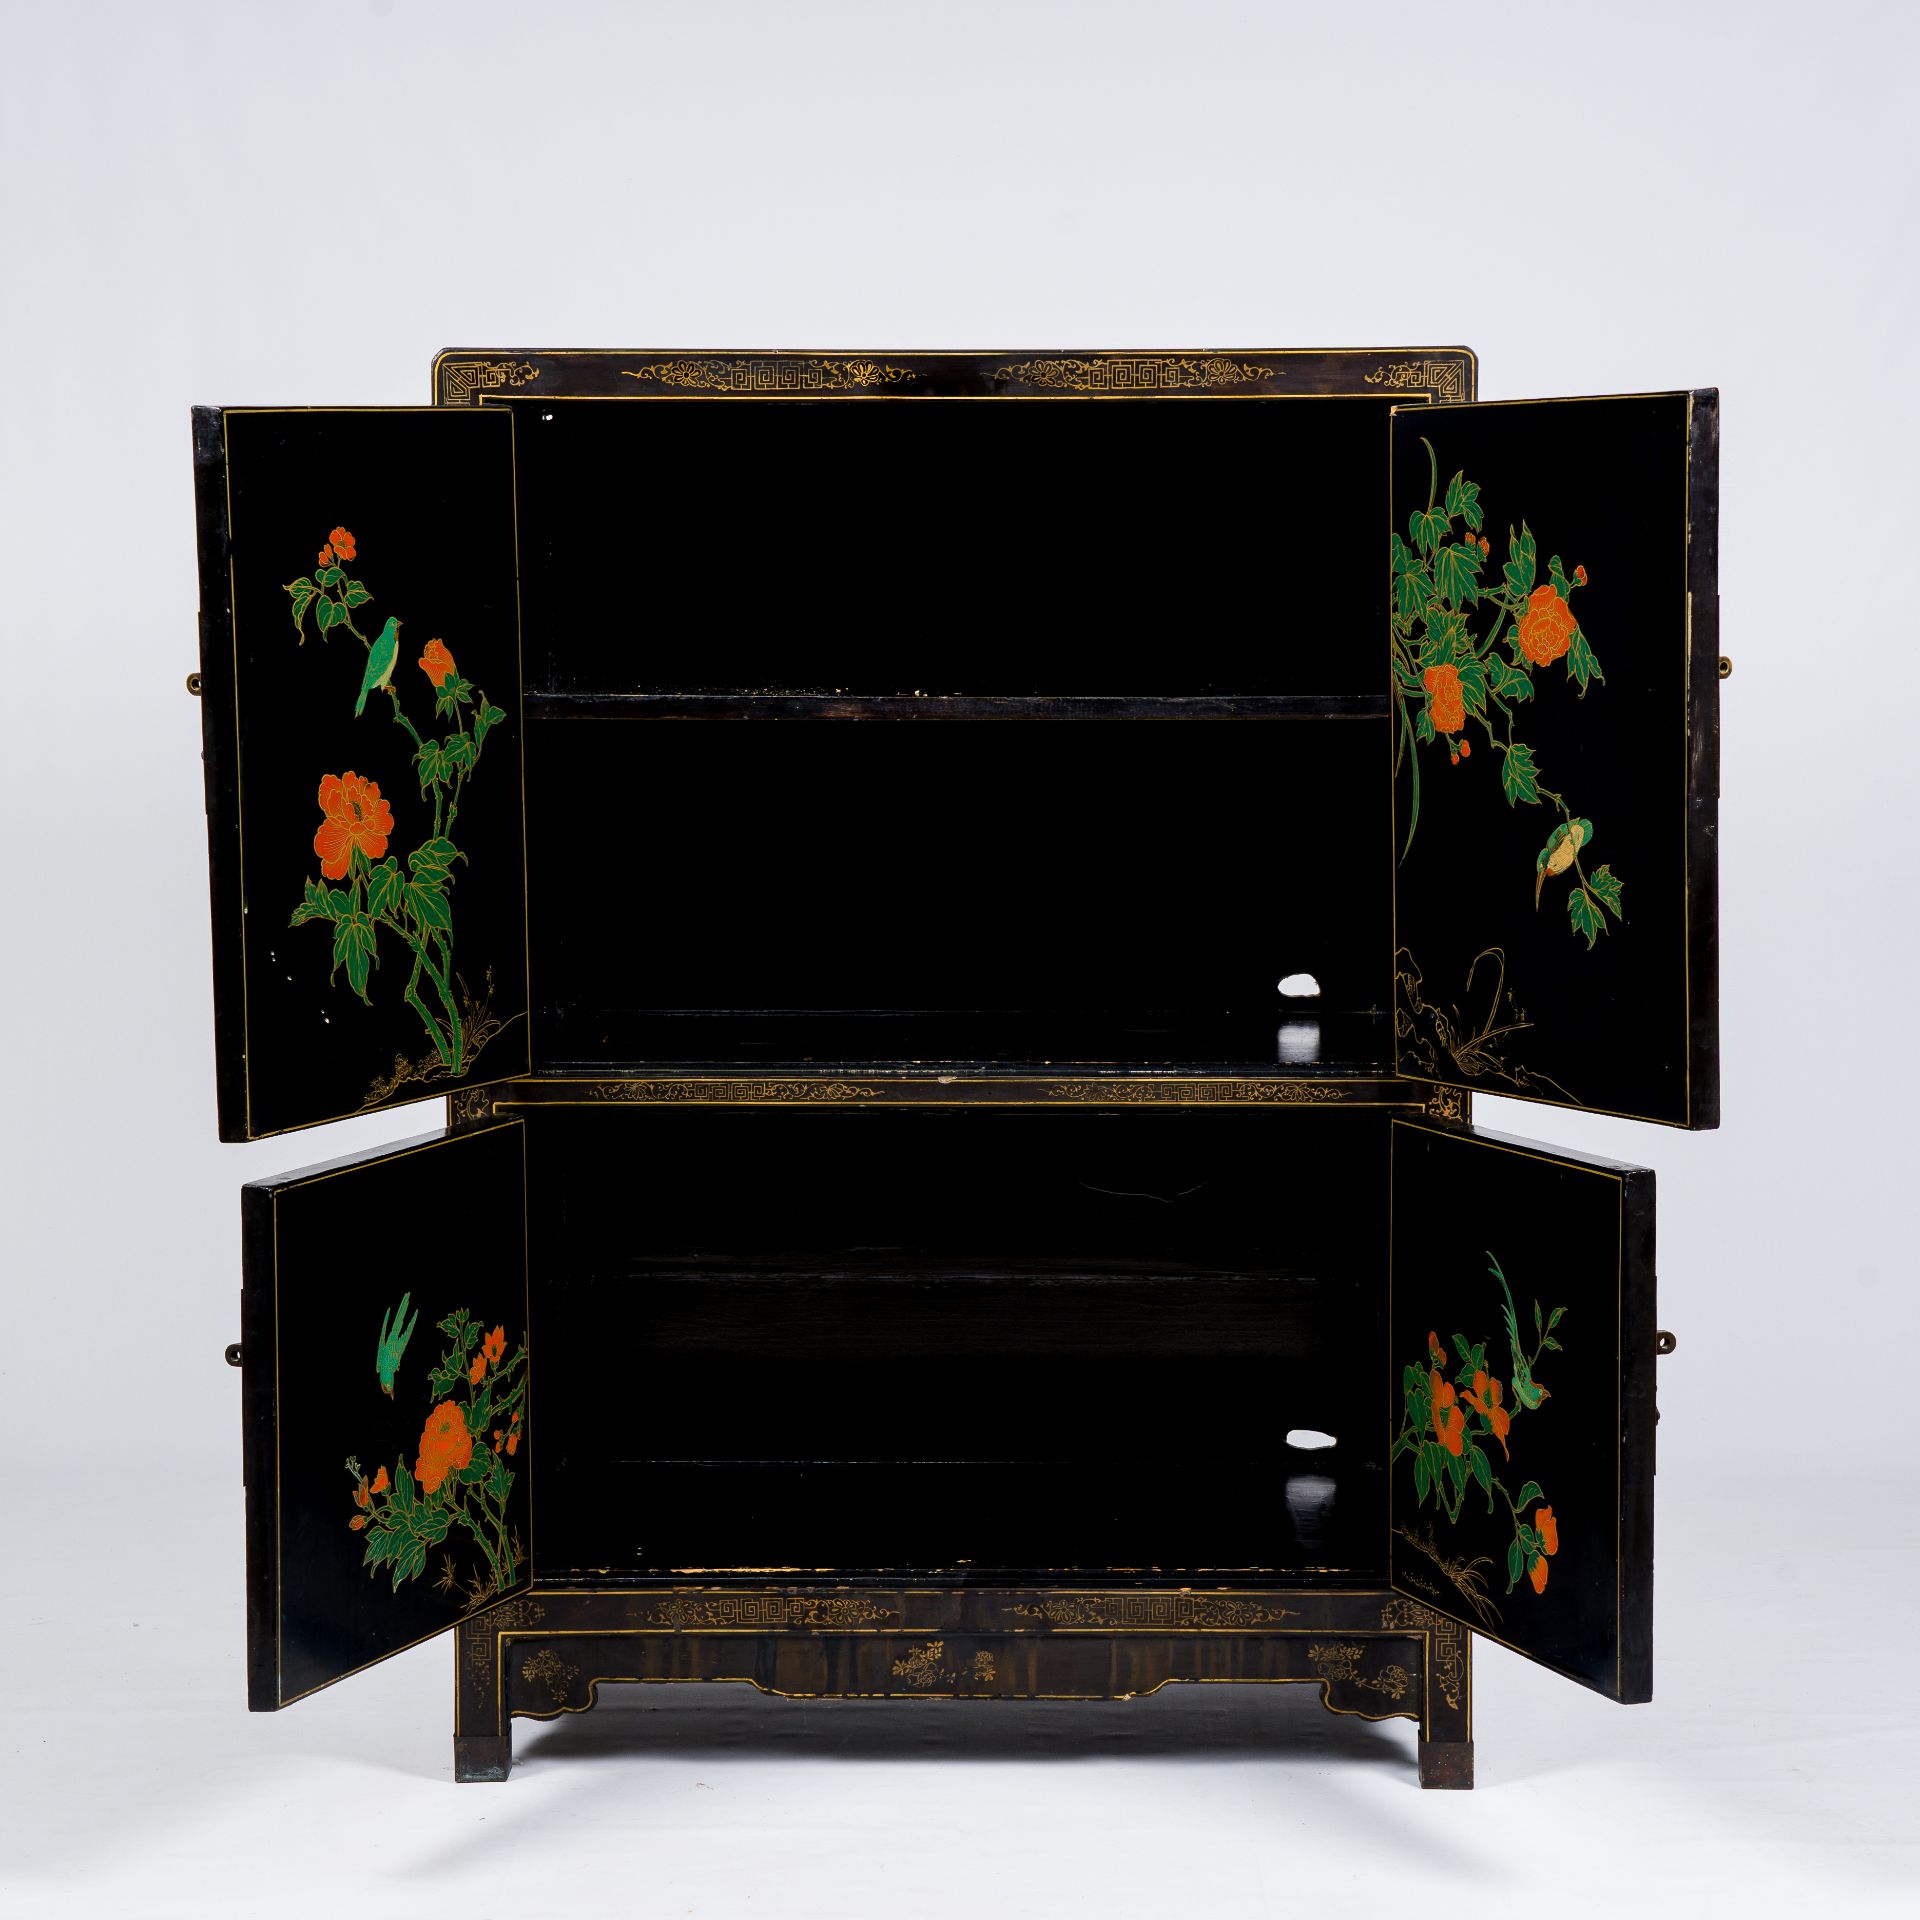 A Chinese lacquered wood cabinet inlaid with semi-precious stones showing ladies on a terrace, flowe - Image 10 of 13